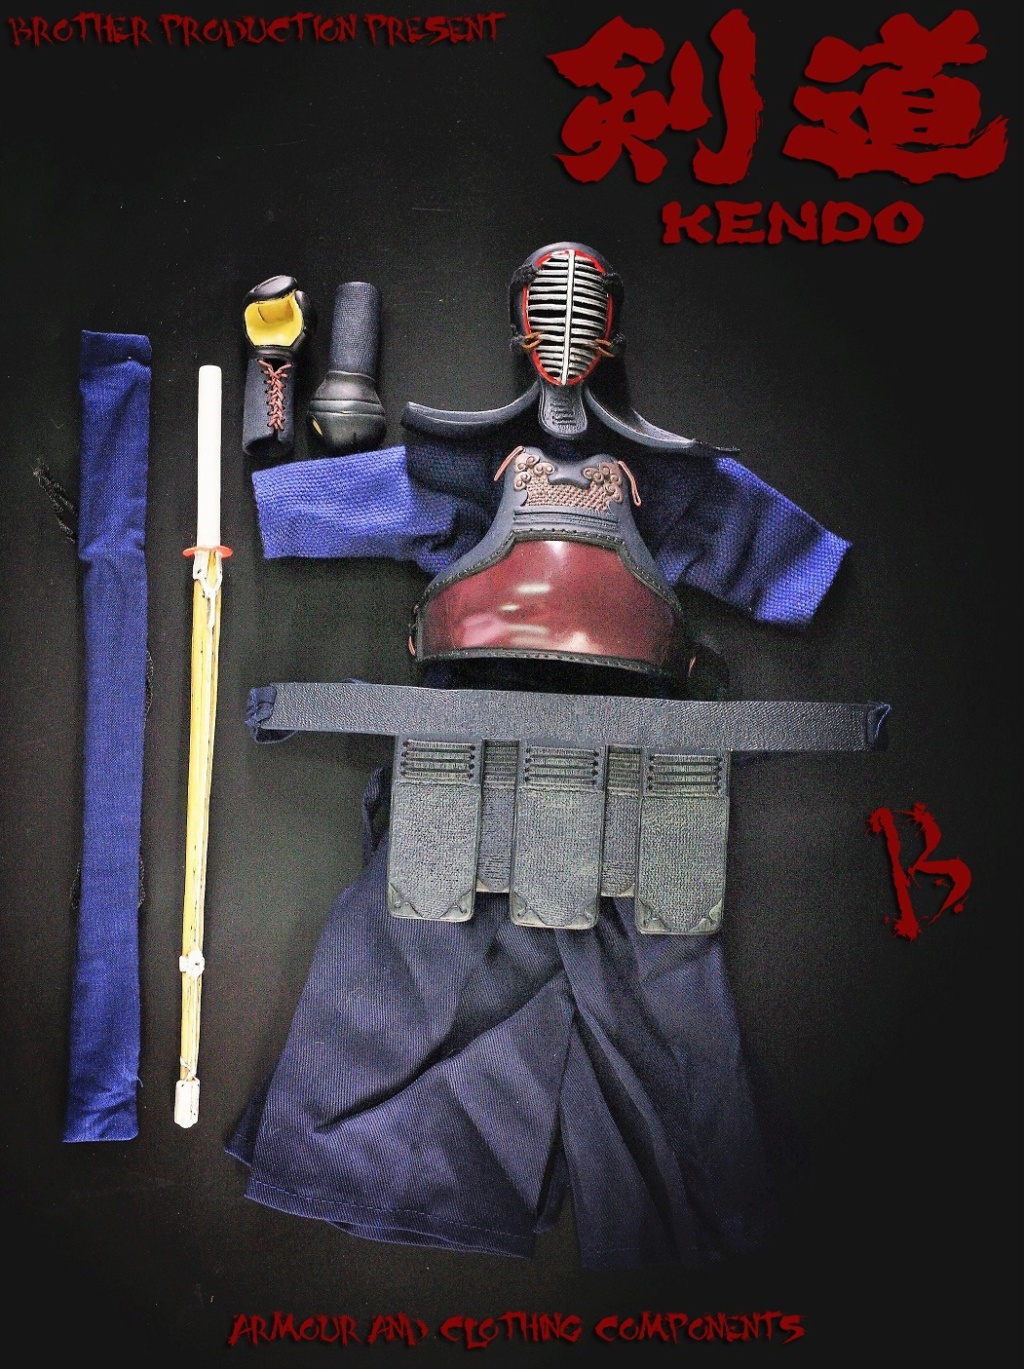 NEW PRODUCT: Brother Production: 1/6 Kendo - Armor Costume Set 15530010